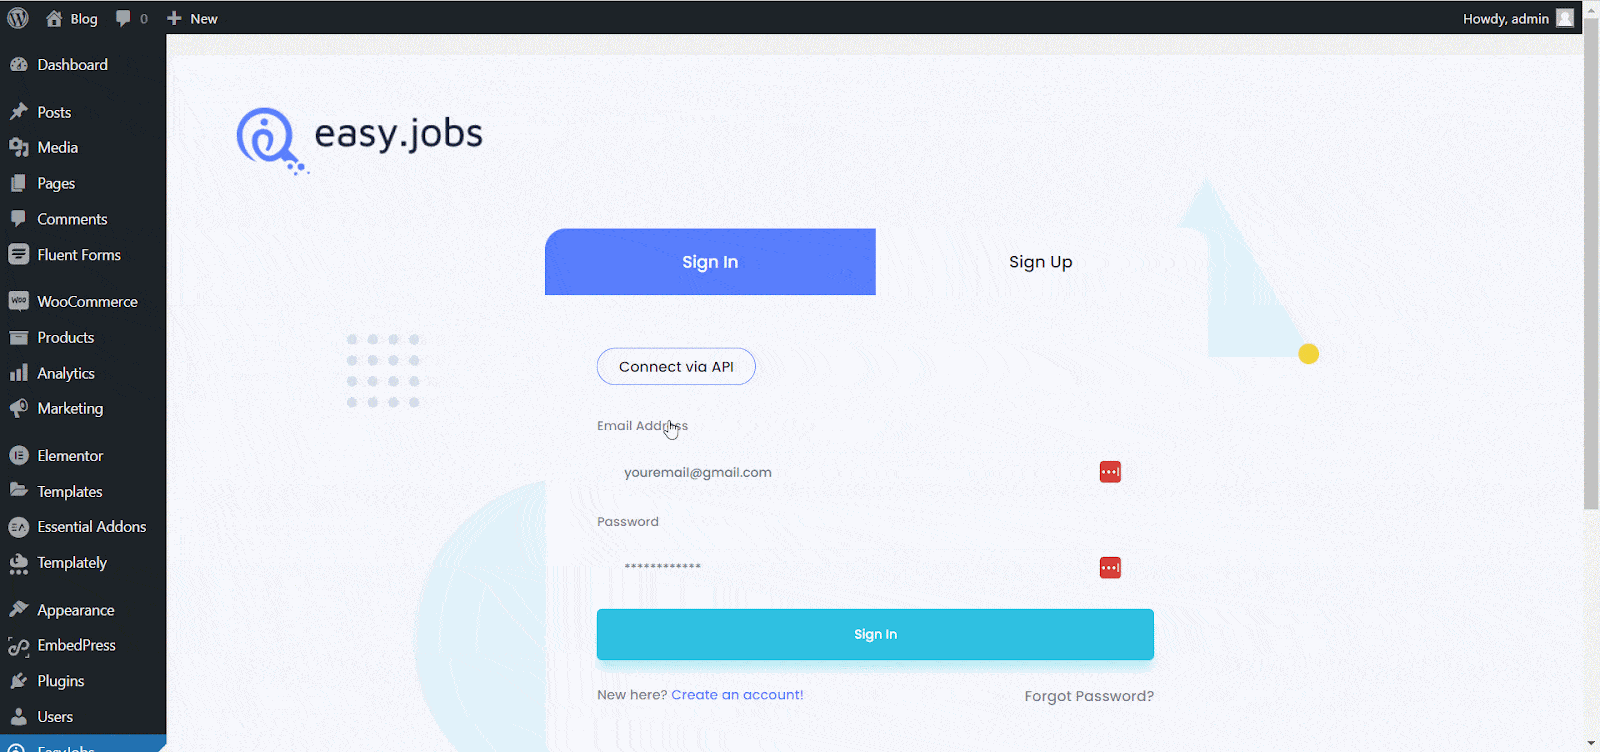 How To Design Job Board Or Job Posting Page Using Elementor With Easy.Jobs?